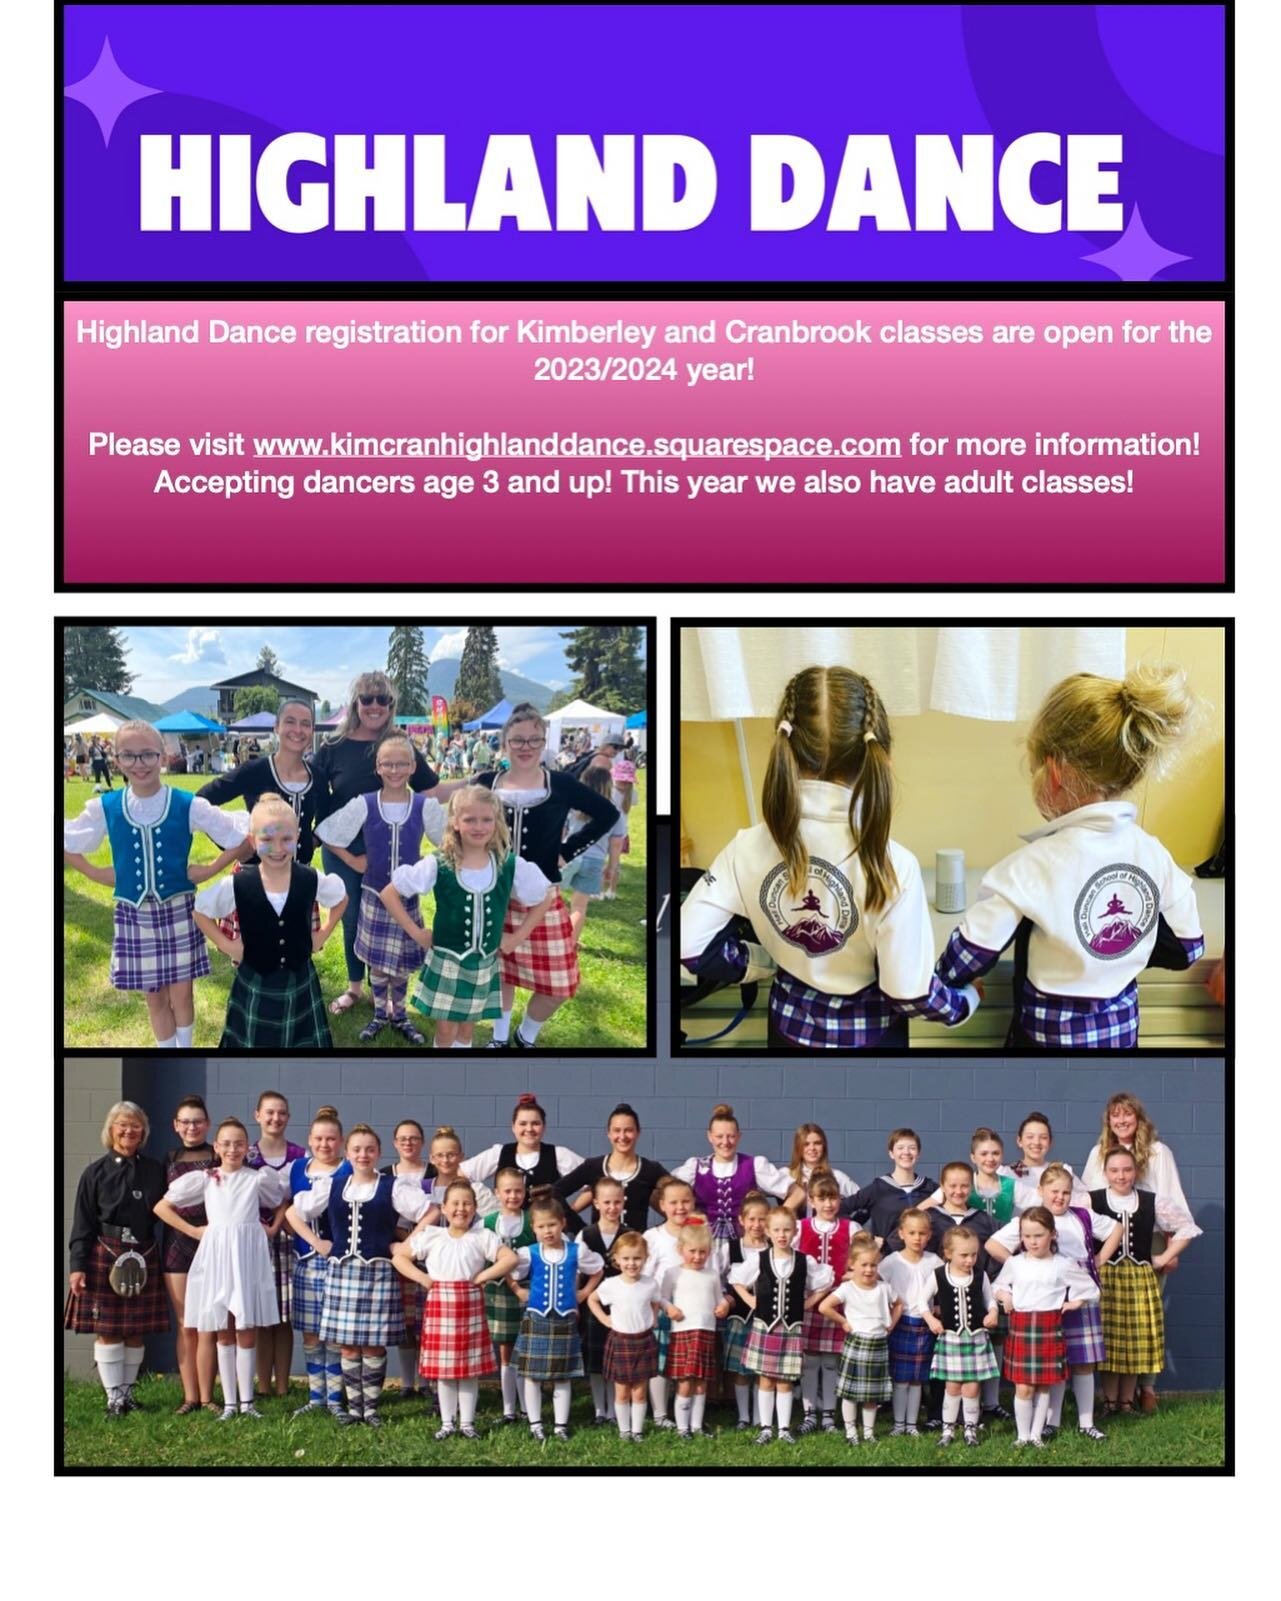 Registration for the 2023/2024 year is open!! www.kimcranhighlanddance.square space.net for more information! Wanting to try a highland dance class??? Wednesday September 13 from 5:00-6:00pm come out to try a highland class for free! Please email Mis